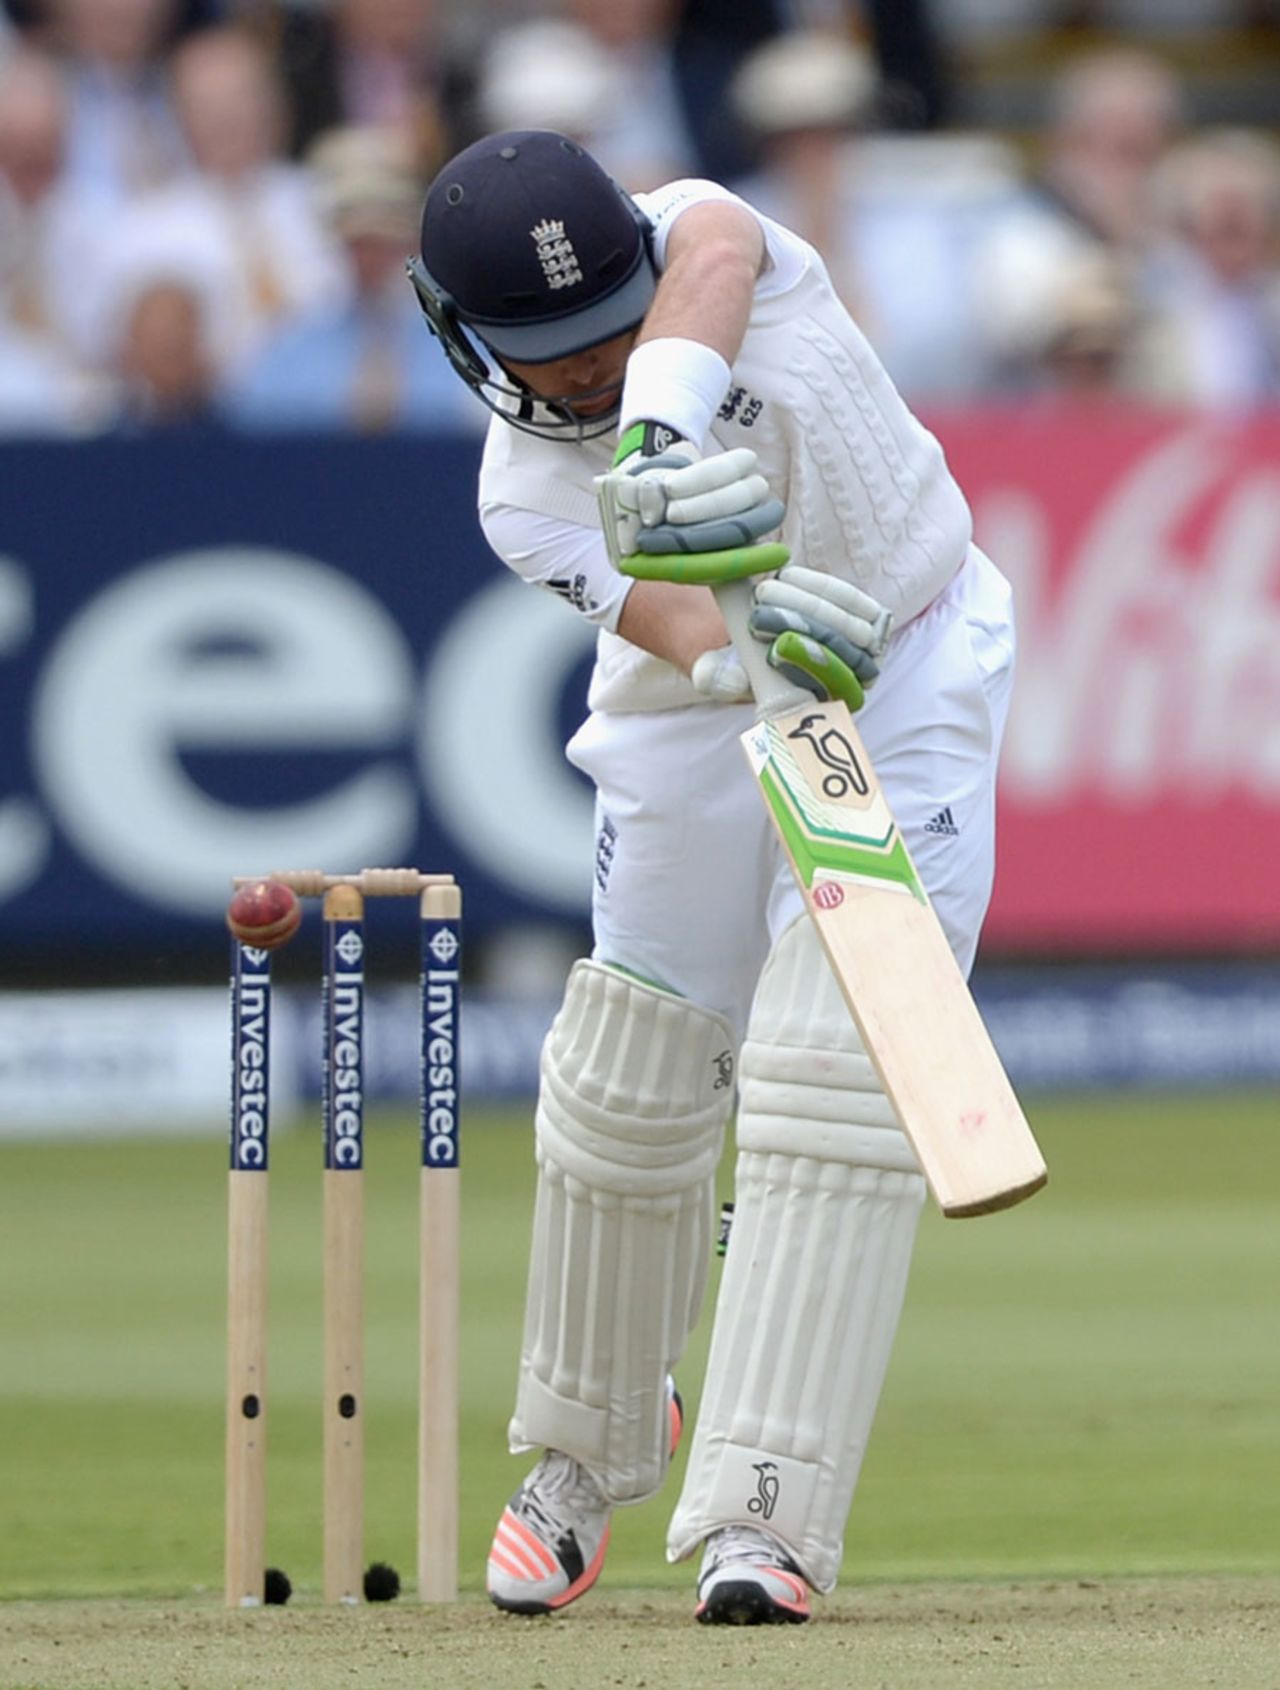 Top of off: Ian Bell gets a good one, England v New Zealand, 1st Investec Test, Lord's, 1st day, May 21, 2015